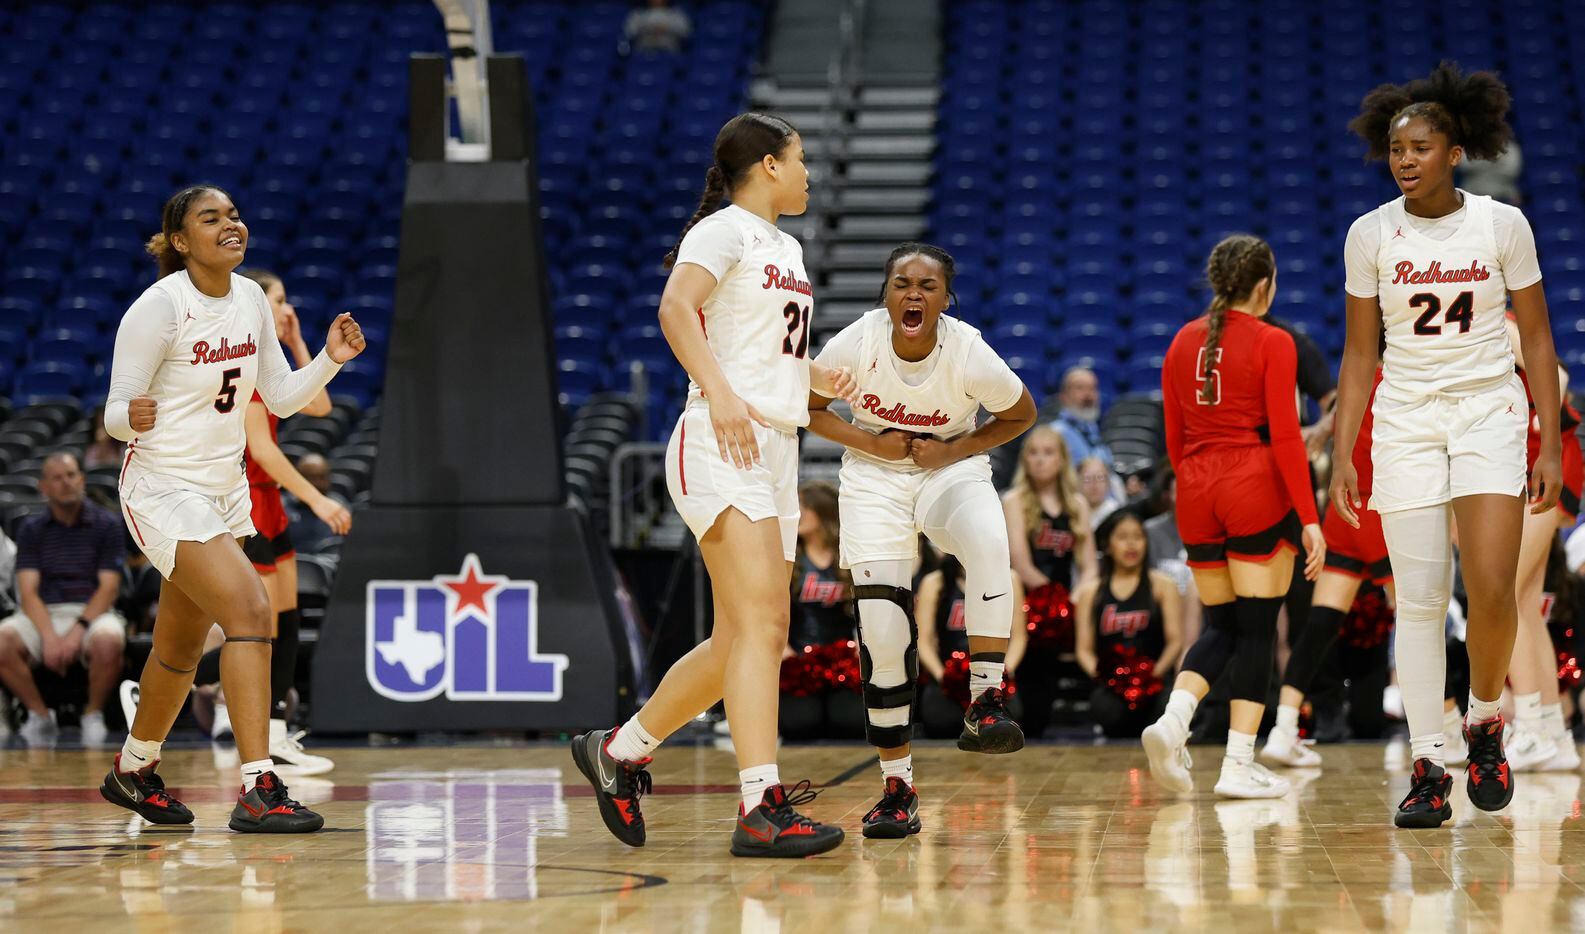 Frisco Liberty Journee Harris (23) reacts after a turnover as Frisco Liberty defeated...